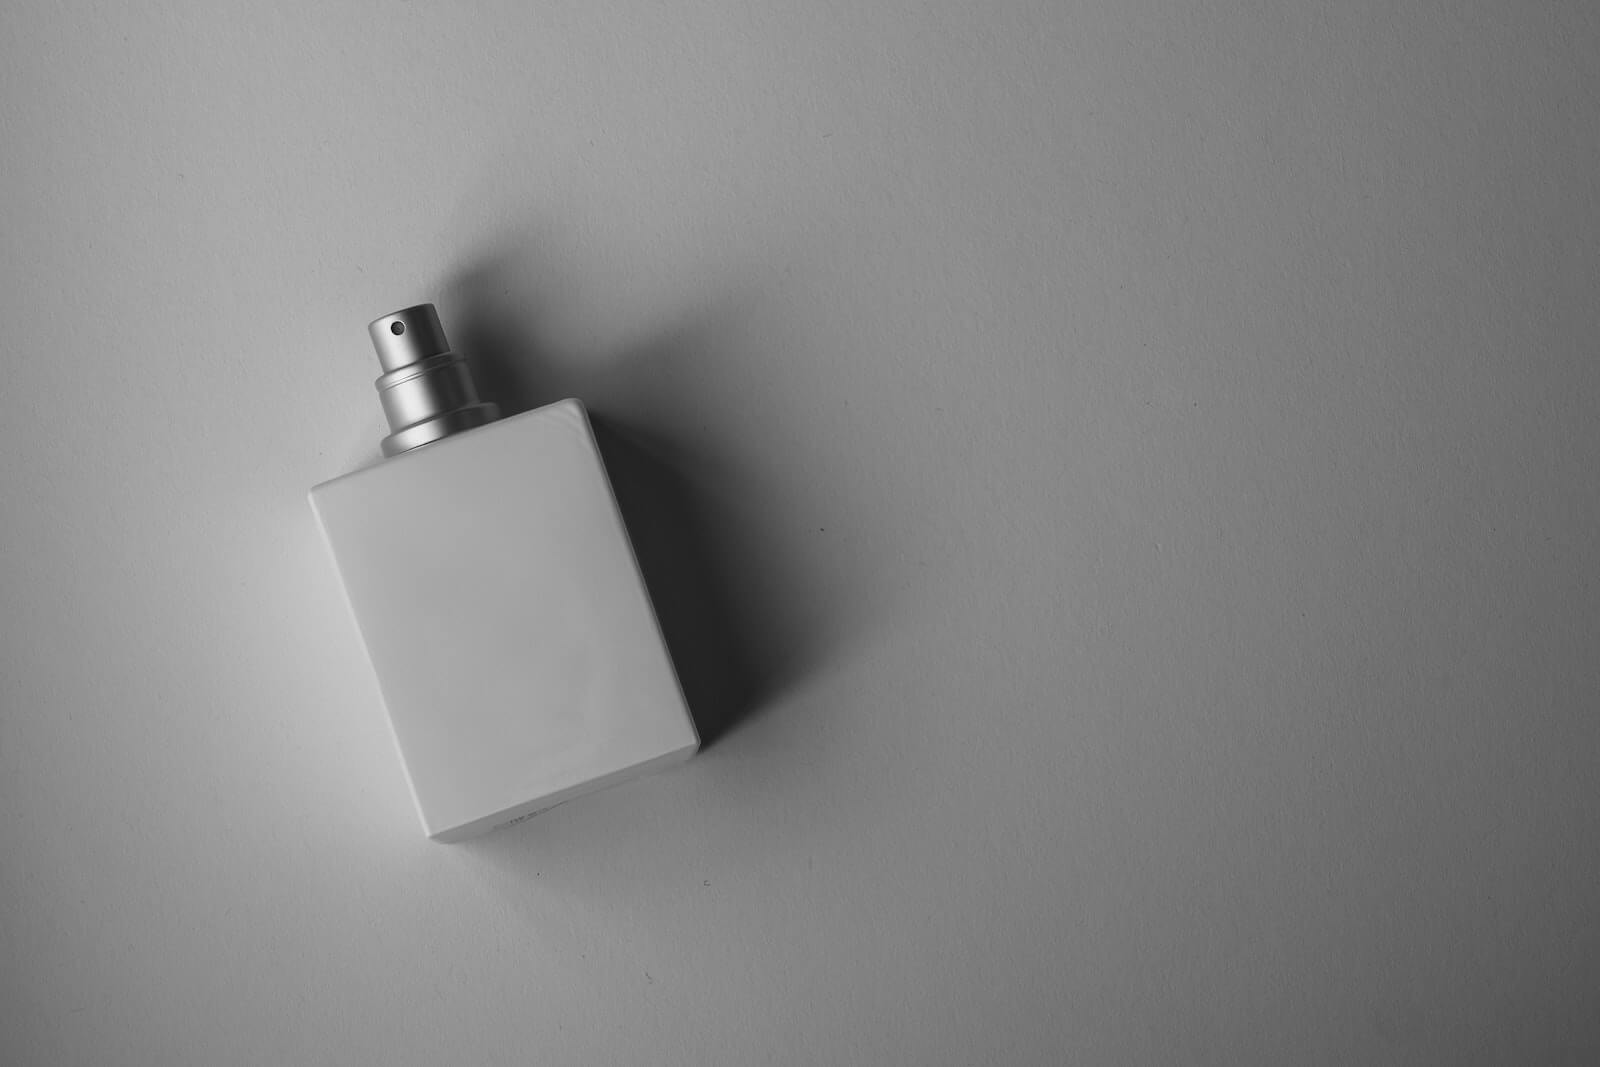 A white bottle of cologne